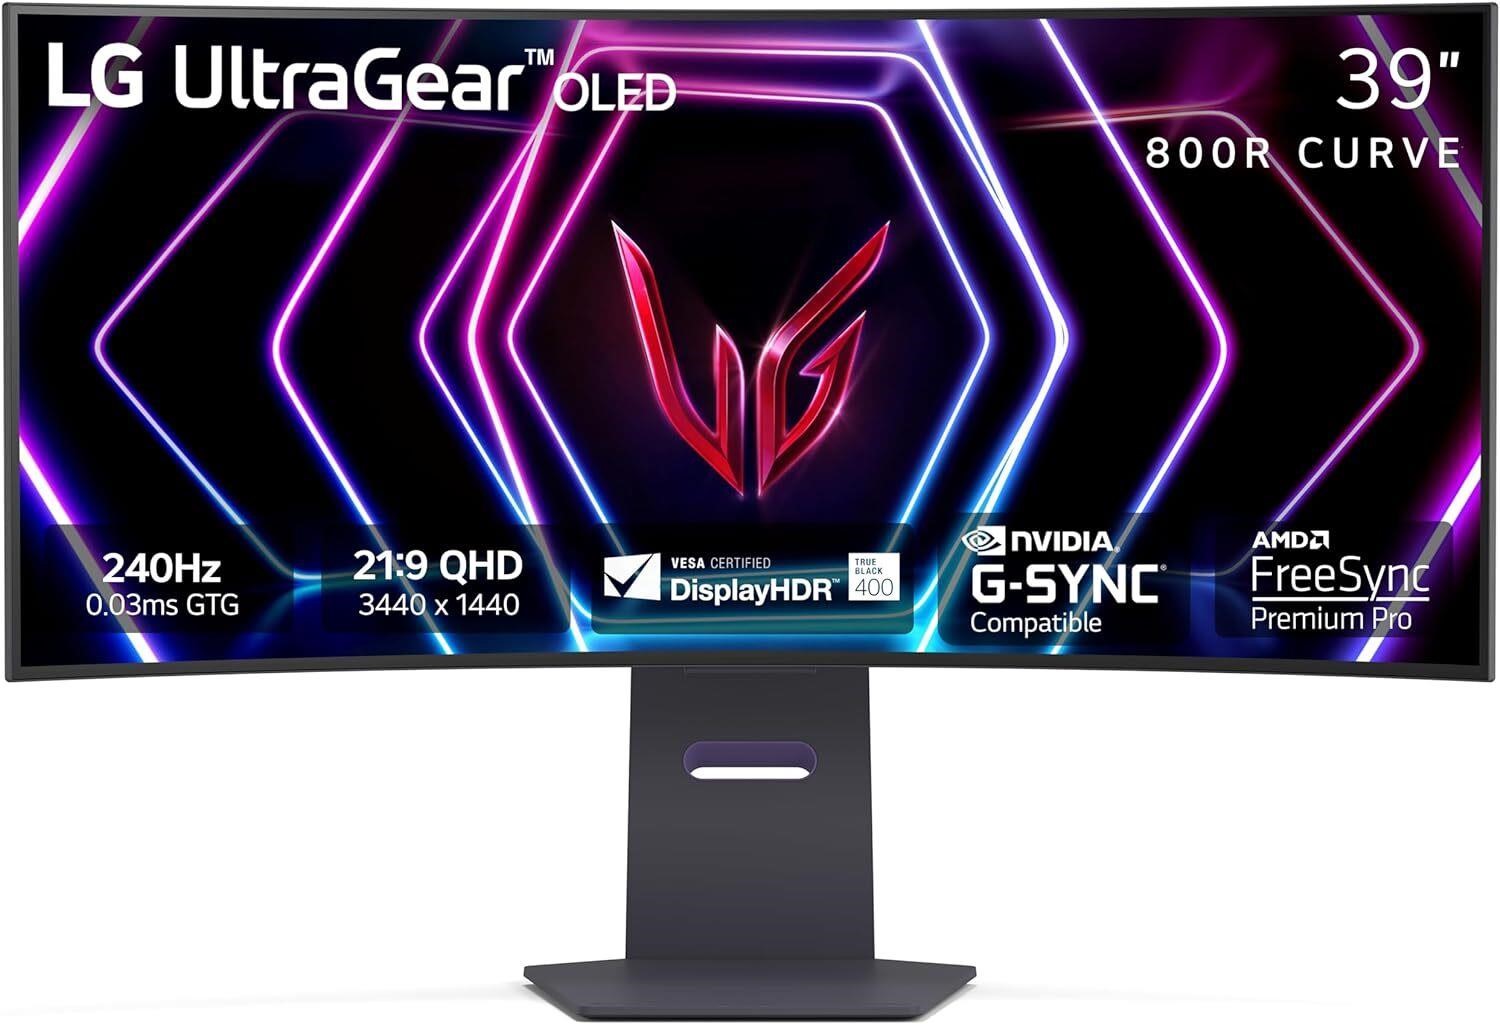 LG 39-inch Ultragear OLED Curved Gaming Monitor